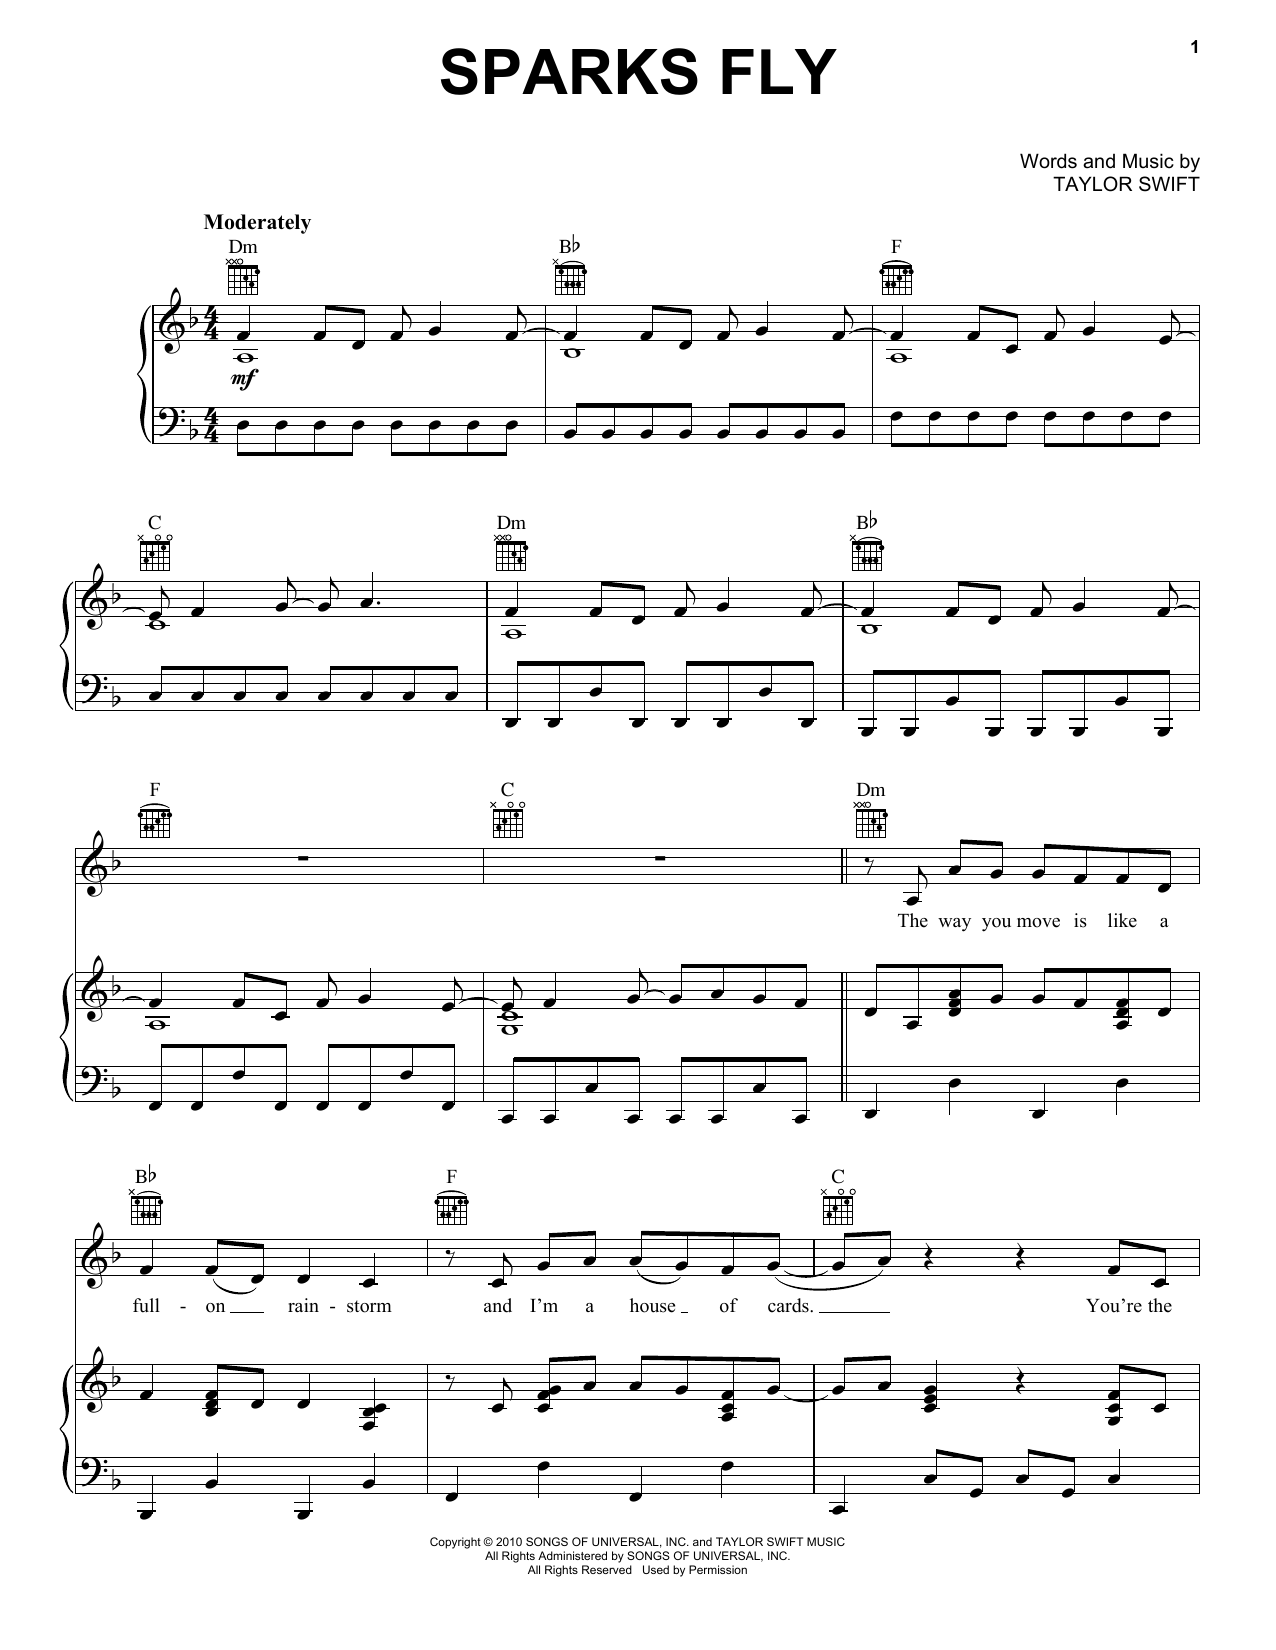 Taylor Swift Sparks Fly sheet music preview music notes and score for Ukulele including 4 page(s)